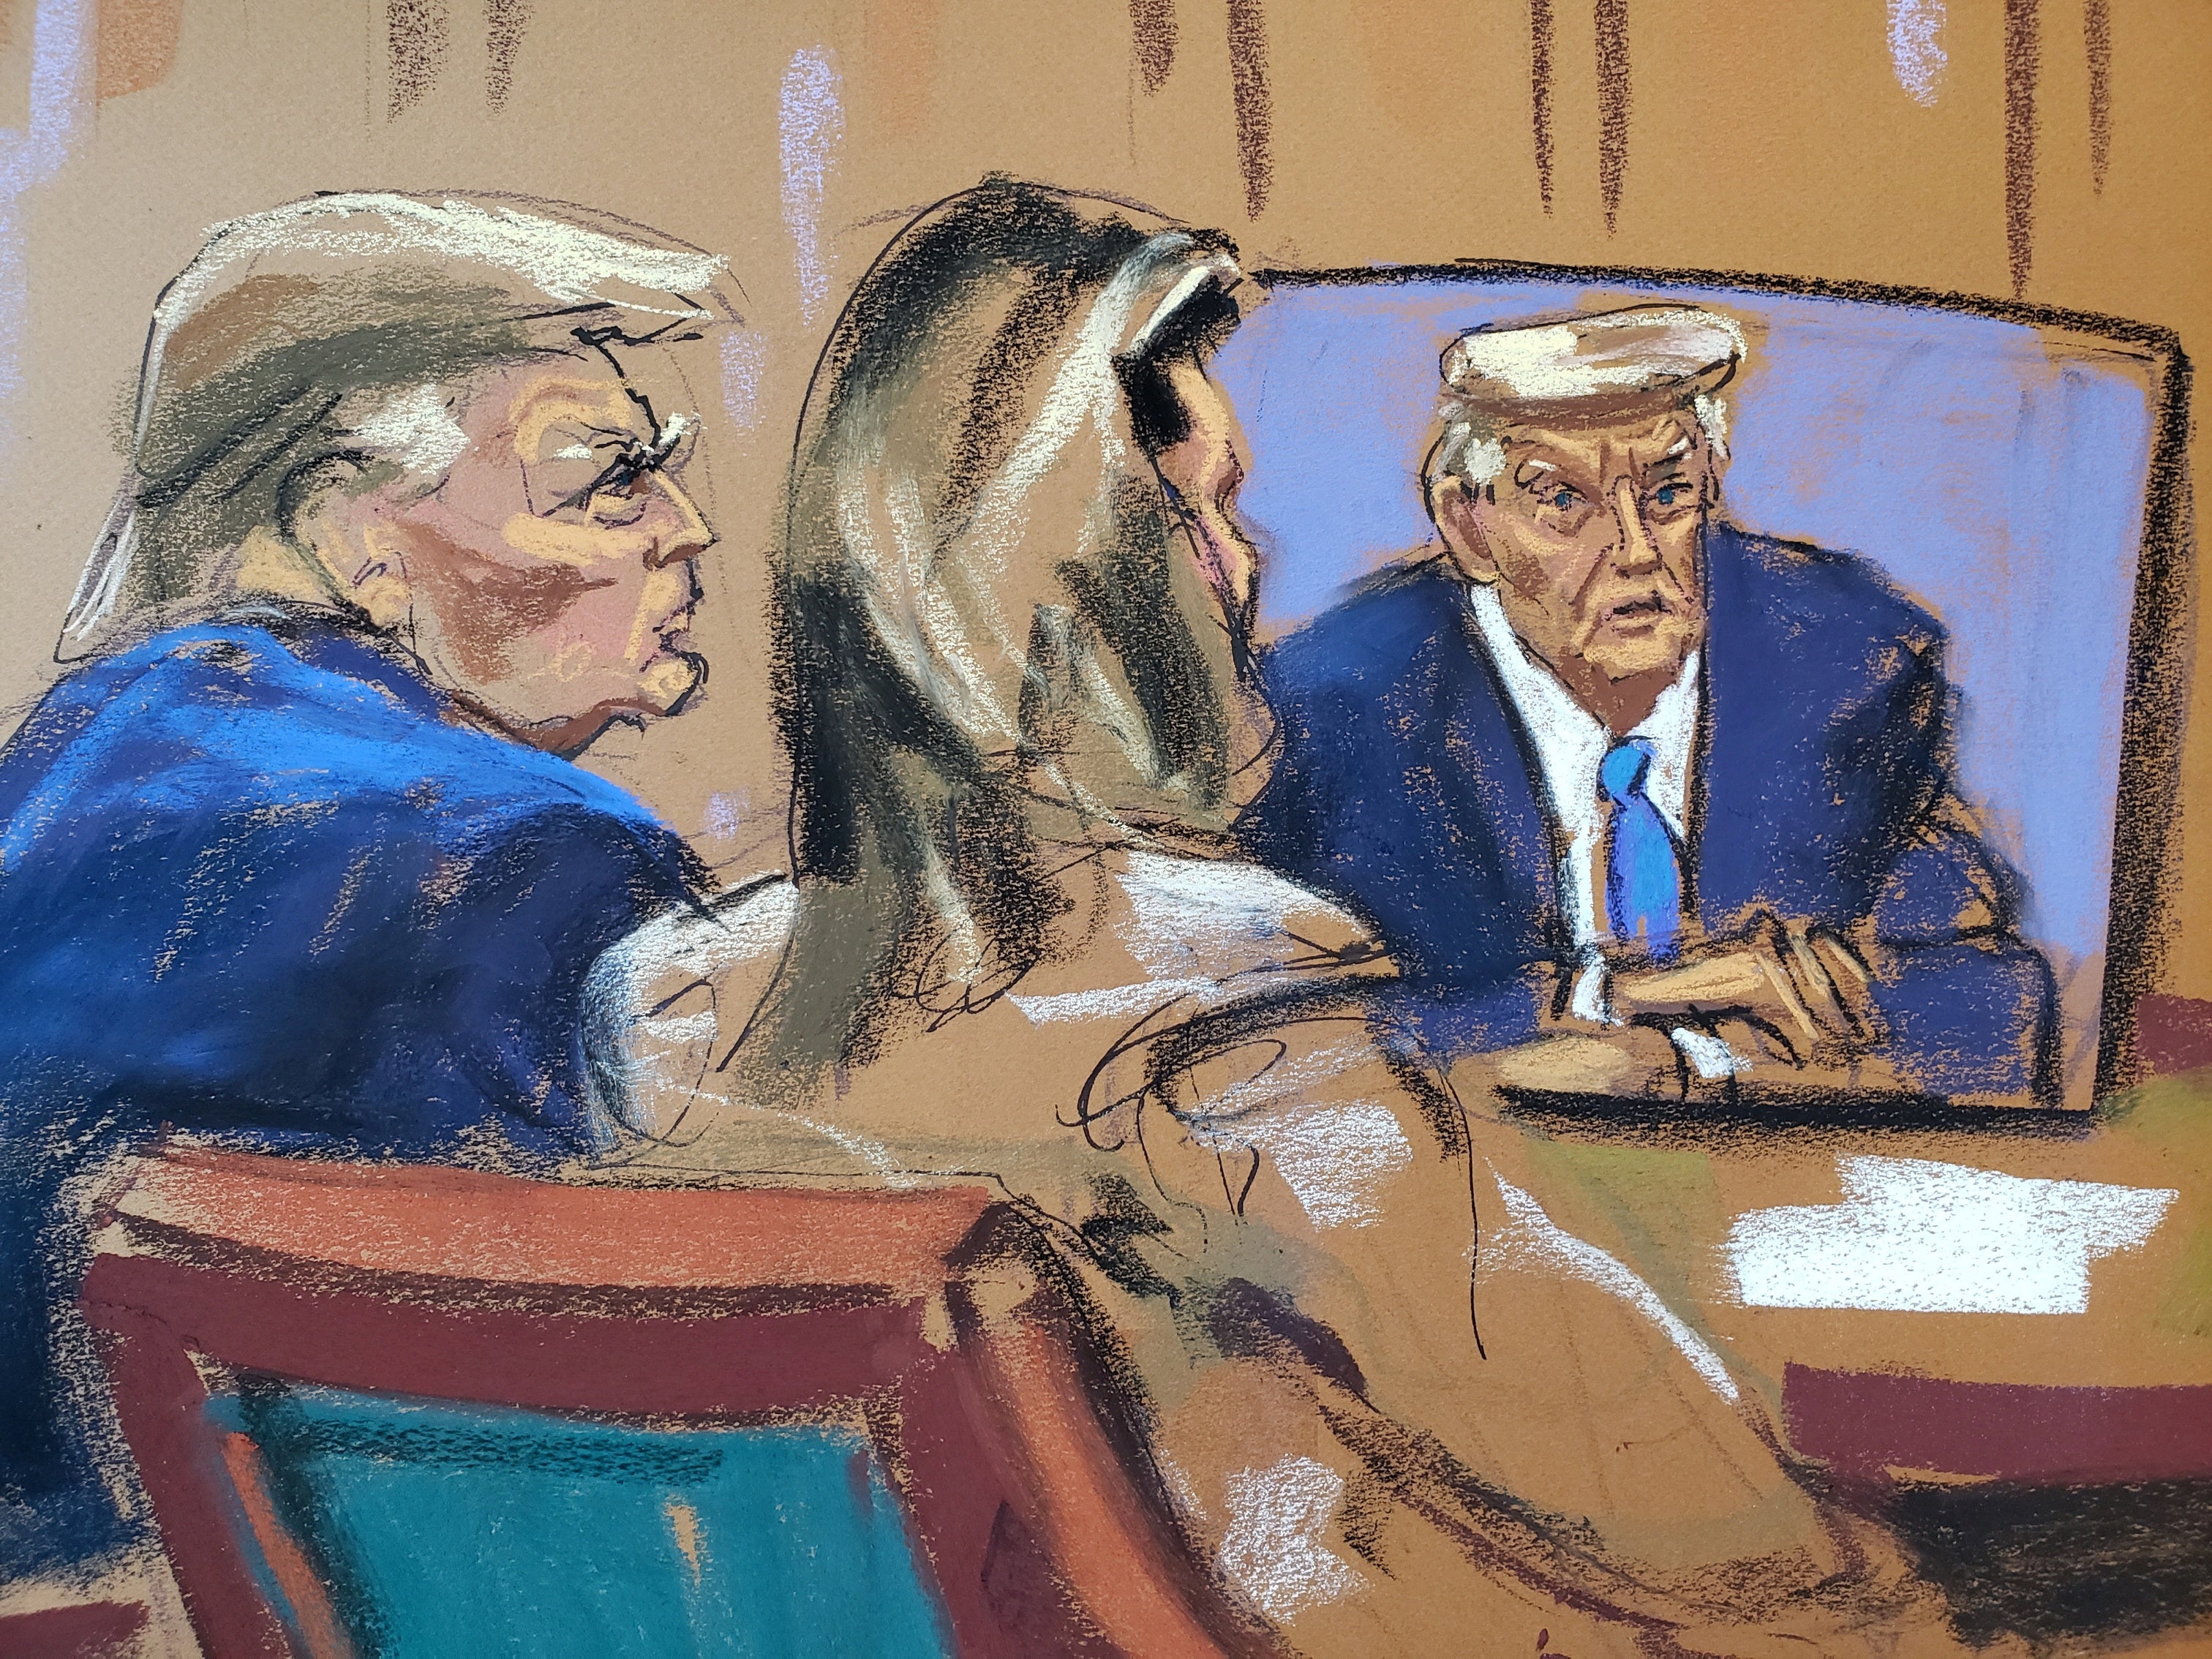 Donald Trump watches his earlier taped deposition during E Jean Carroll’s defamation trial